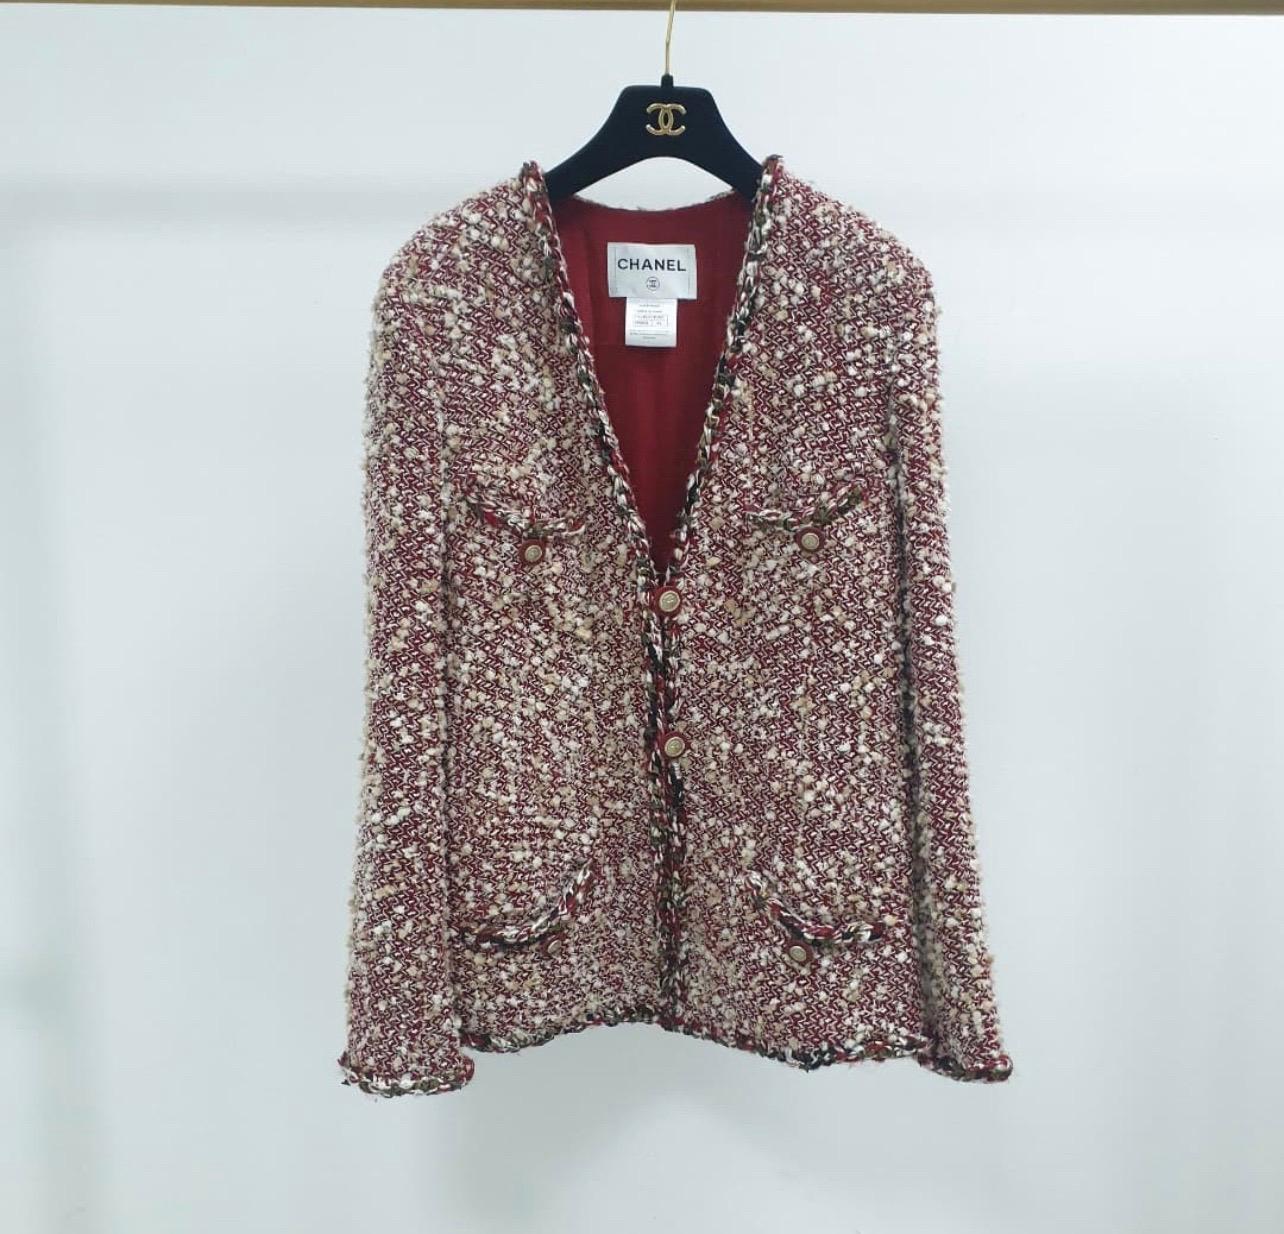 From the Paris-Dallas 2014 collection comes this Chanel Red/Ecru Tweed Jacket!
Composed of a beautiful wool blended boucle tweed, this jacket has a collarless style with a braided trim.
With chic star engraved goldtone buttons, this jacket is an